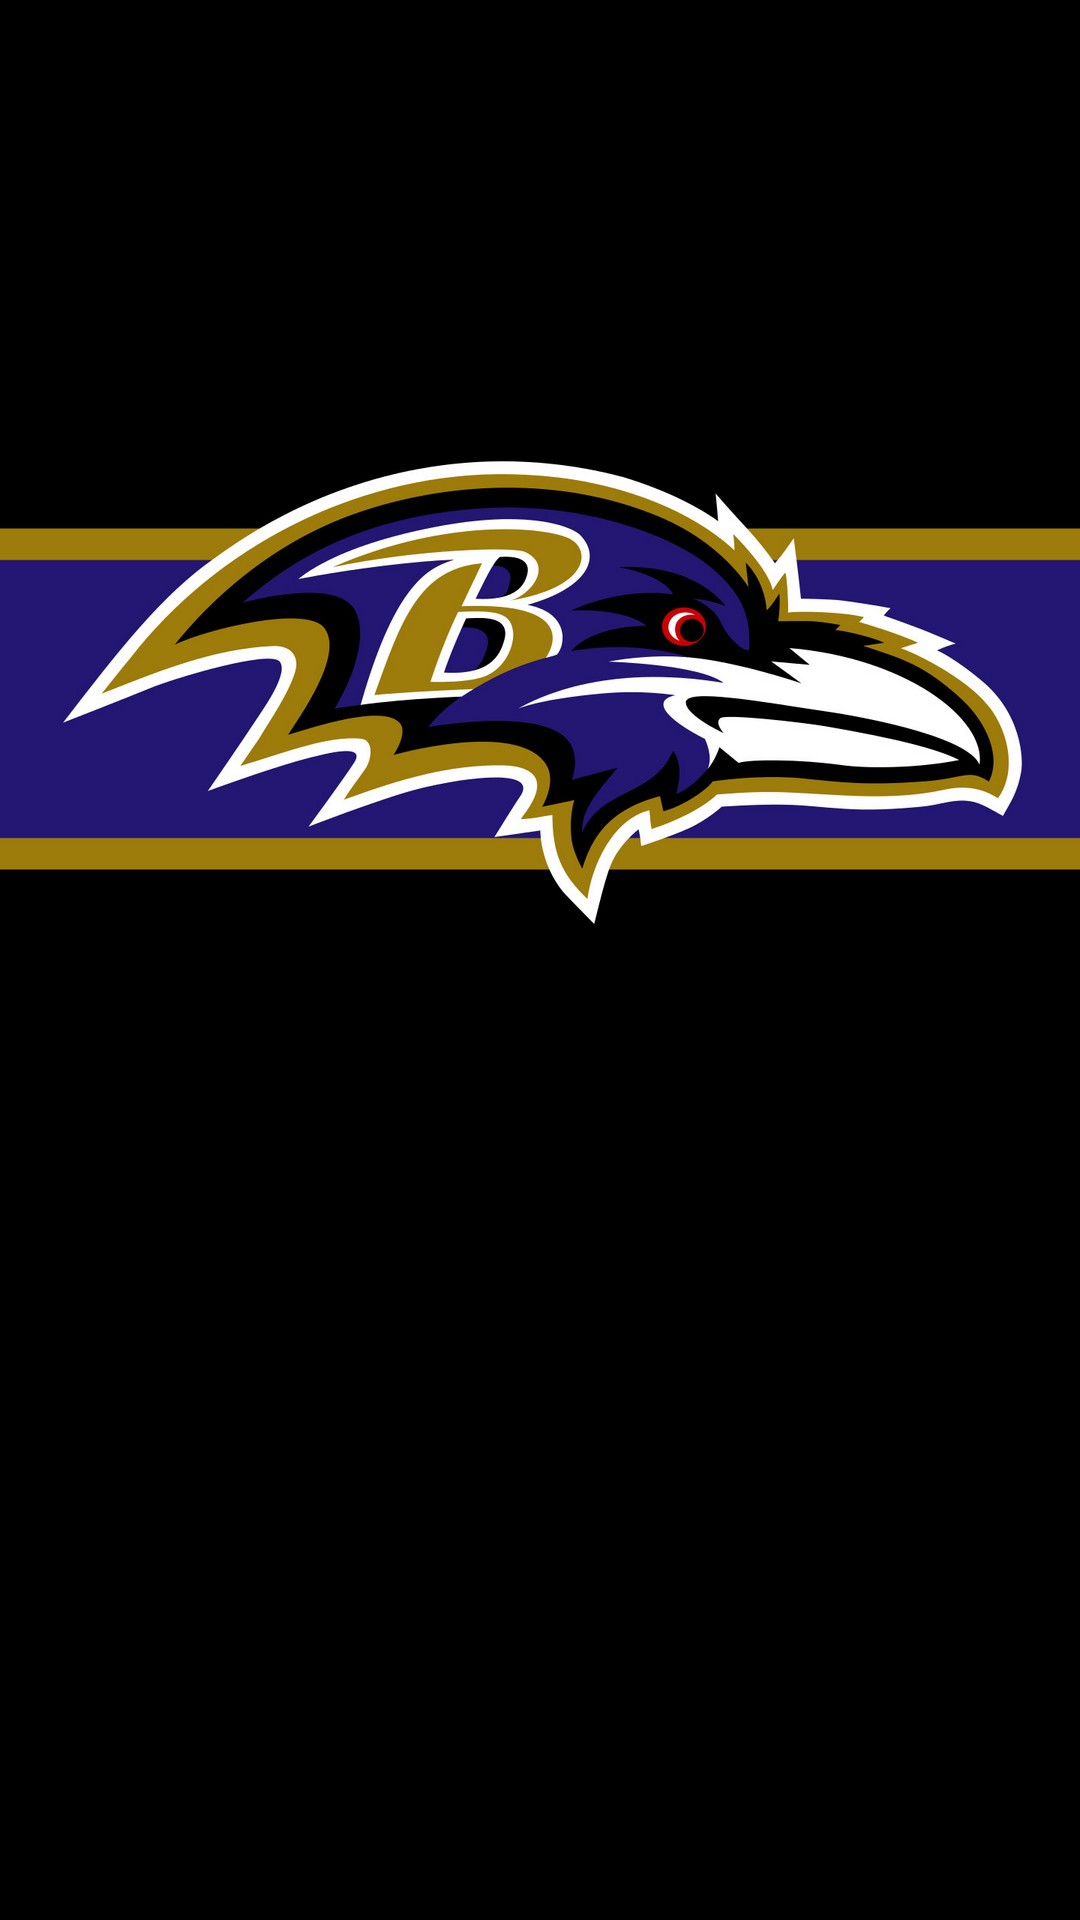 Baltimore Ravens Wallpaper iPhone HD With high-resolution 1080X1920 pixel. You can use this wallpaper for your Mac or Windows Desktop Background, iPhone, Android or Tablet and another Smartphone device